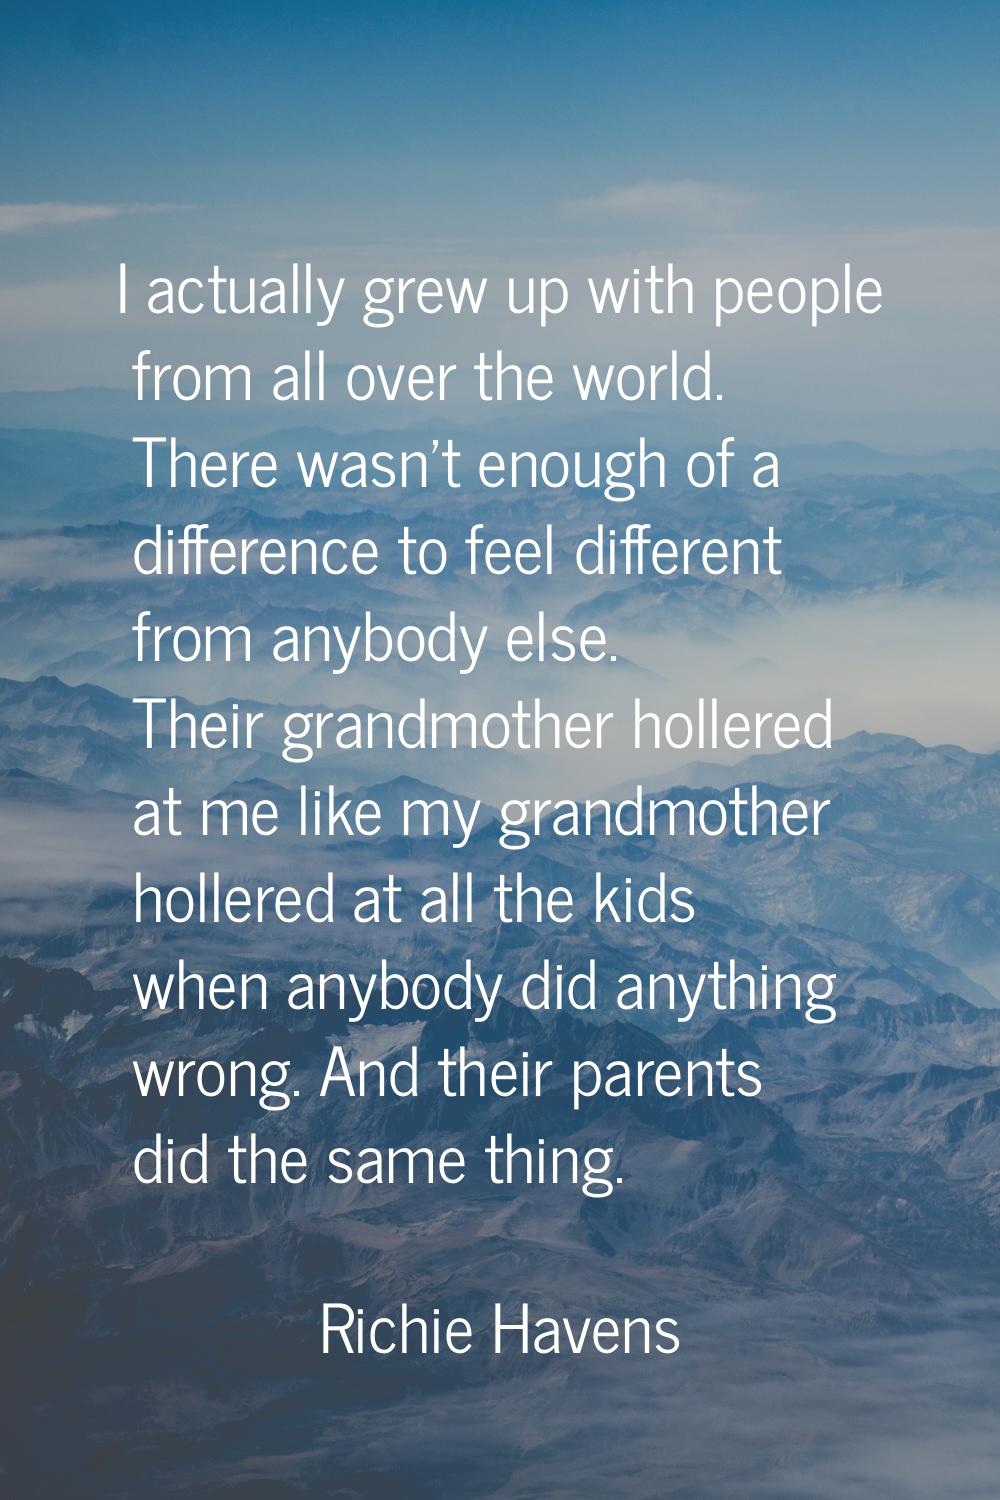 I actually grew up with people from all over the world. There wasn't enough of a difference to feel